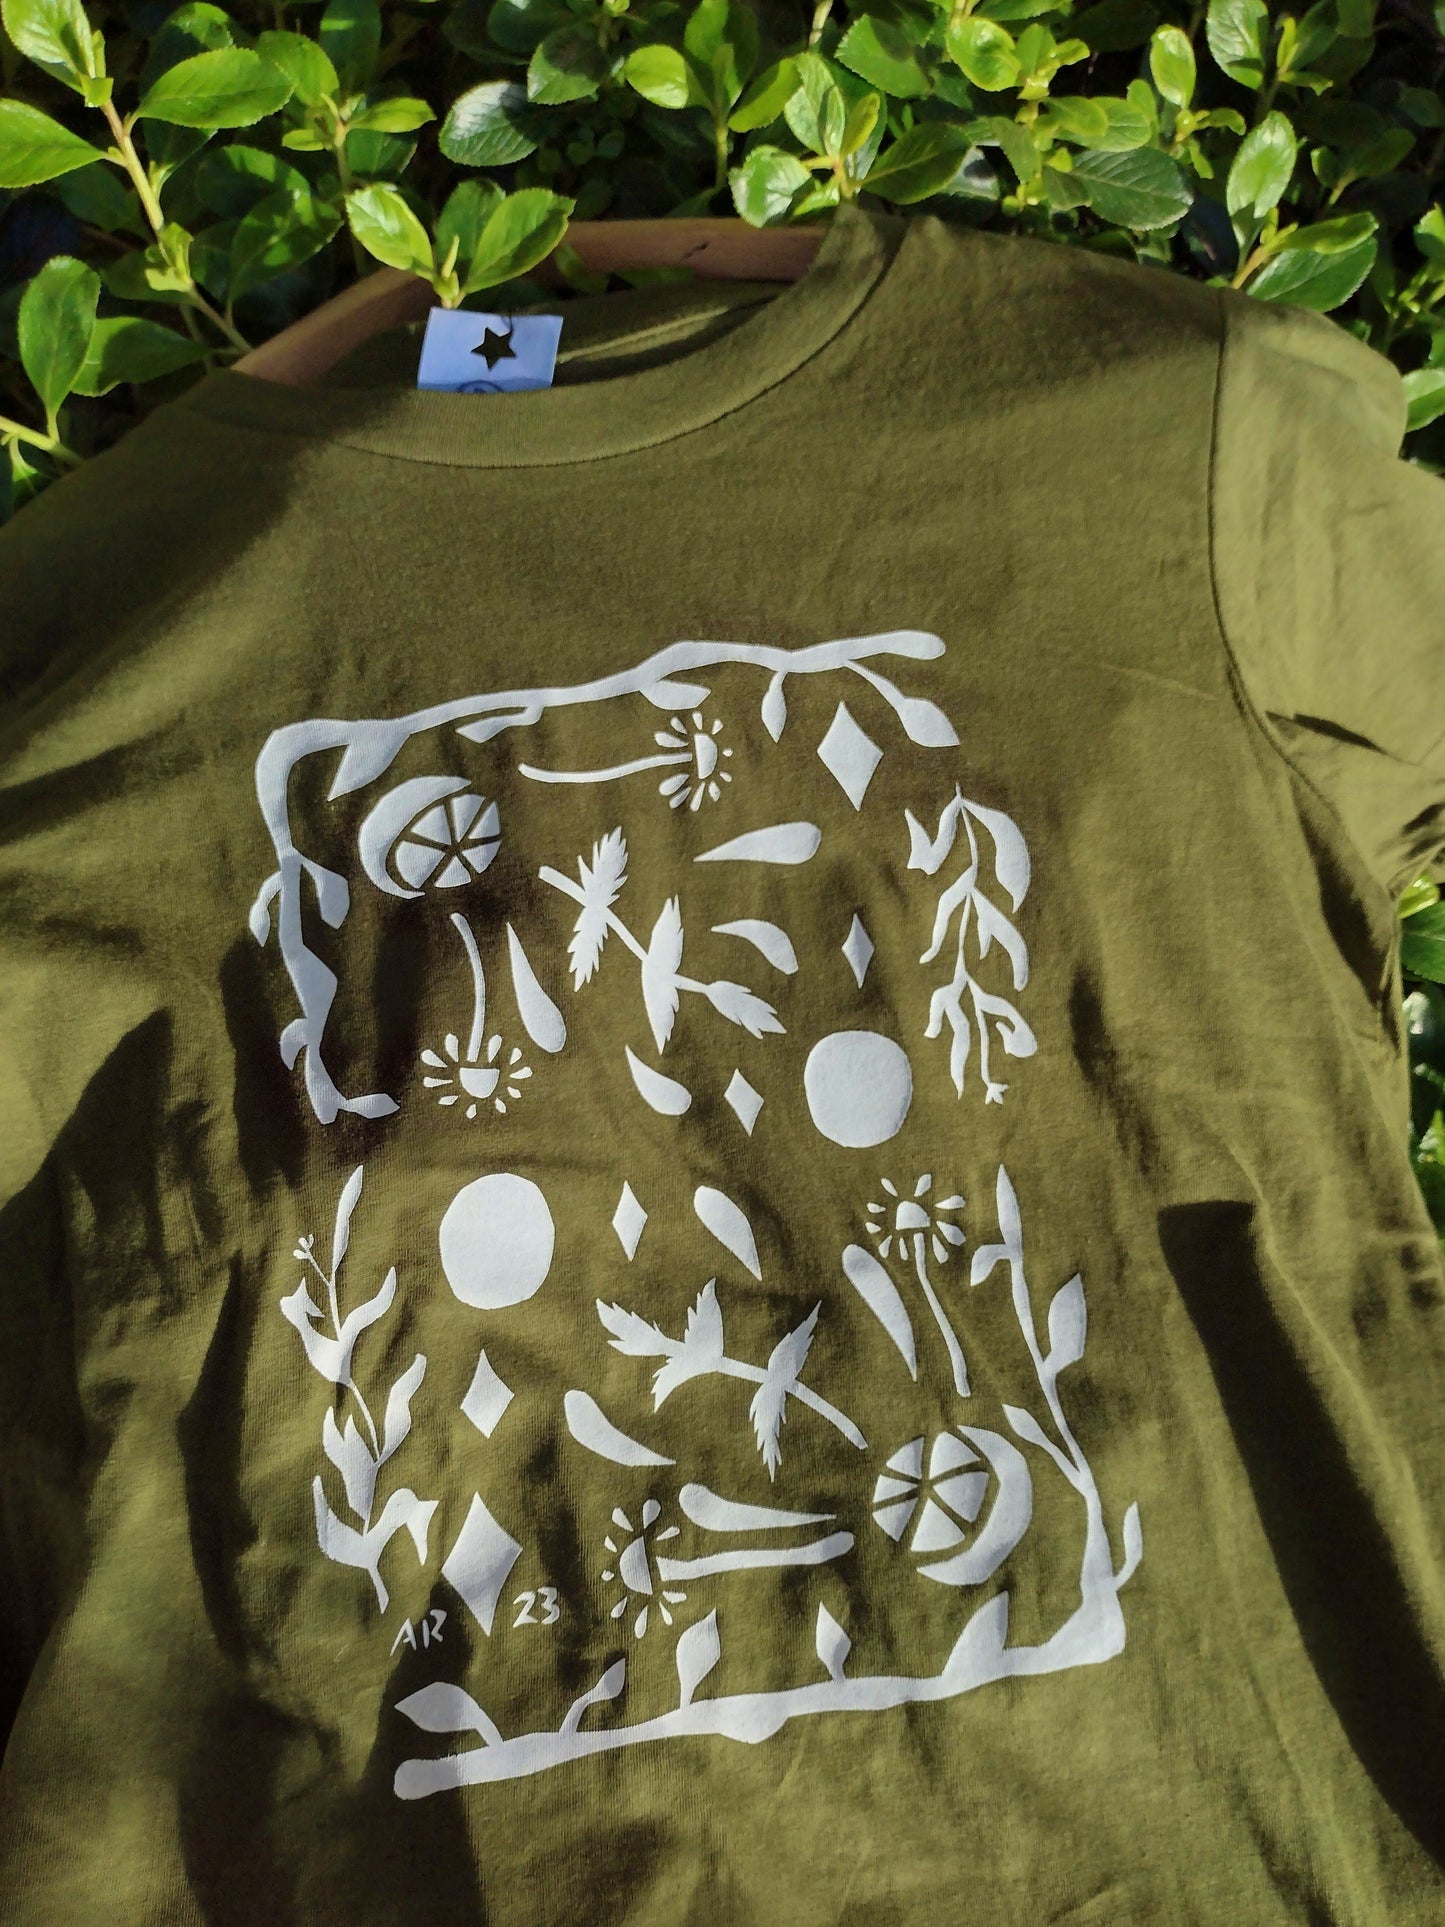 The Roots Tee